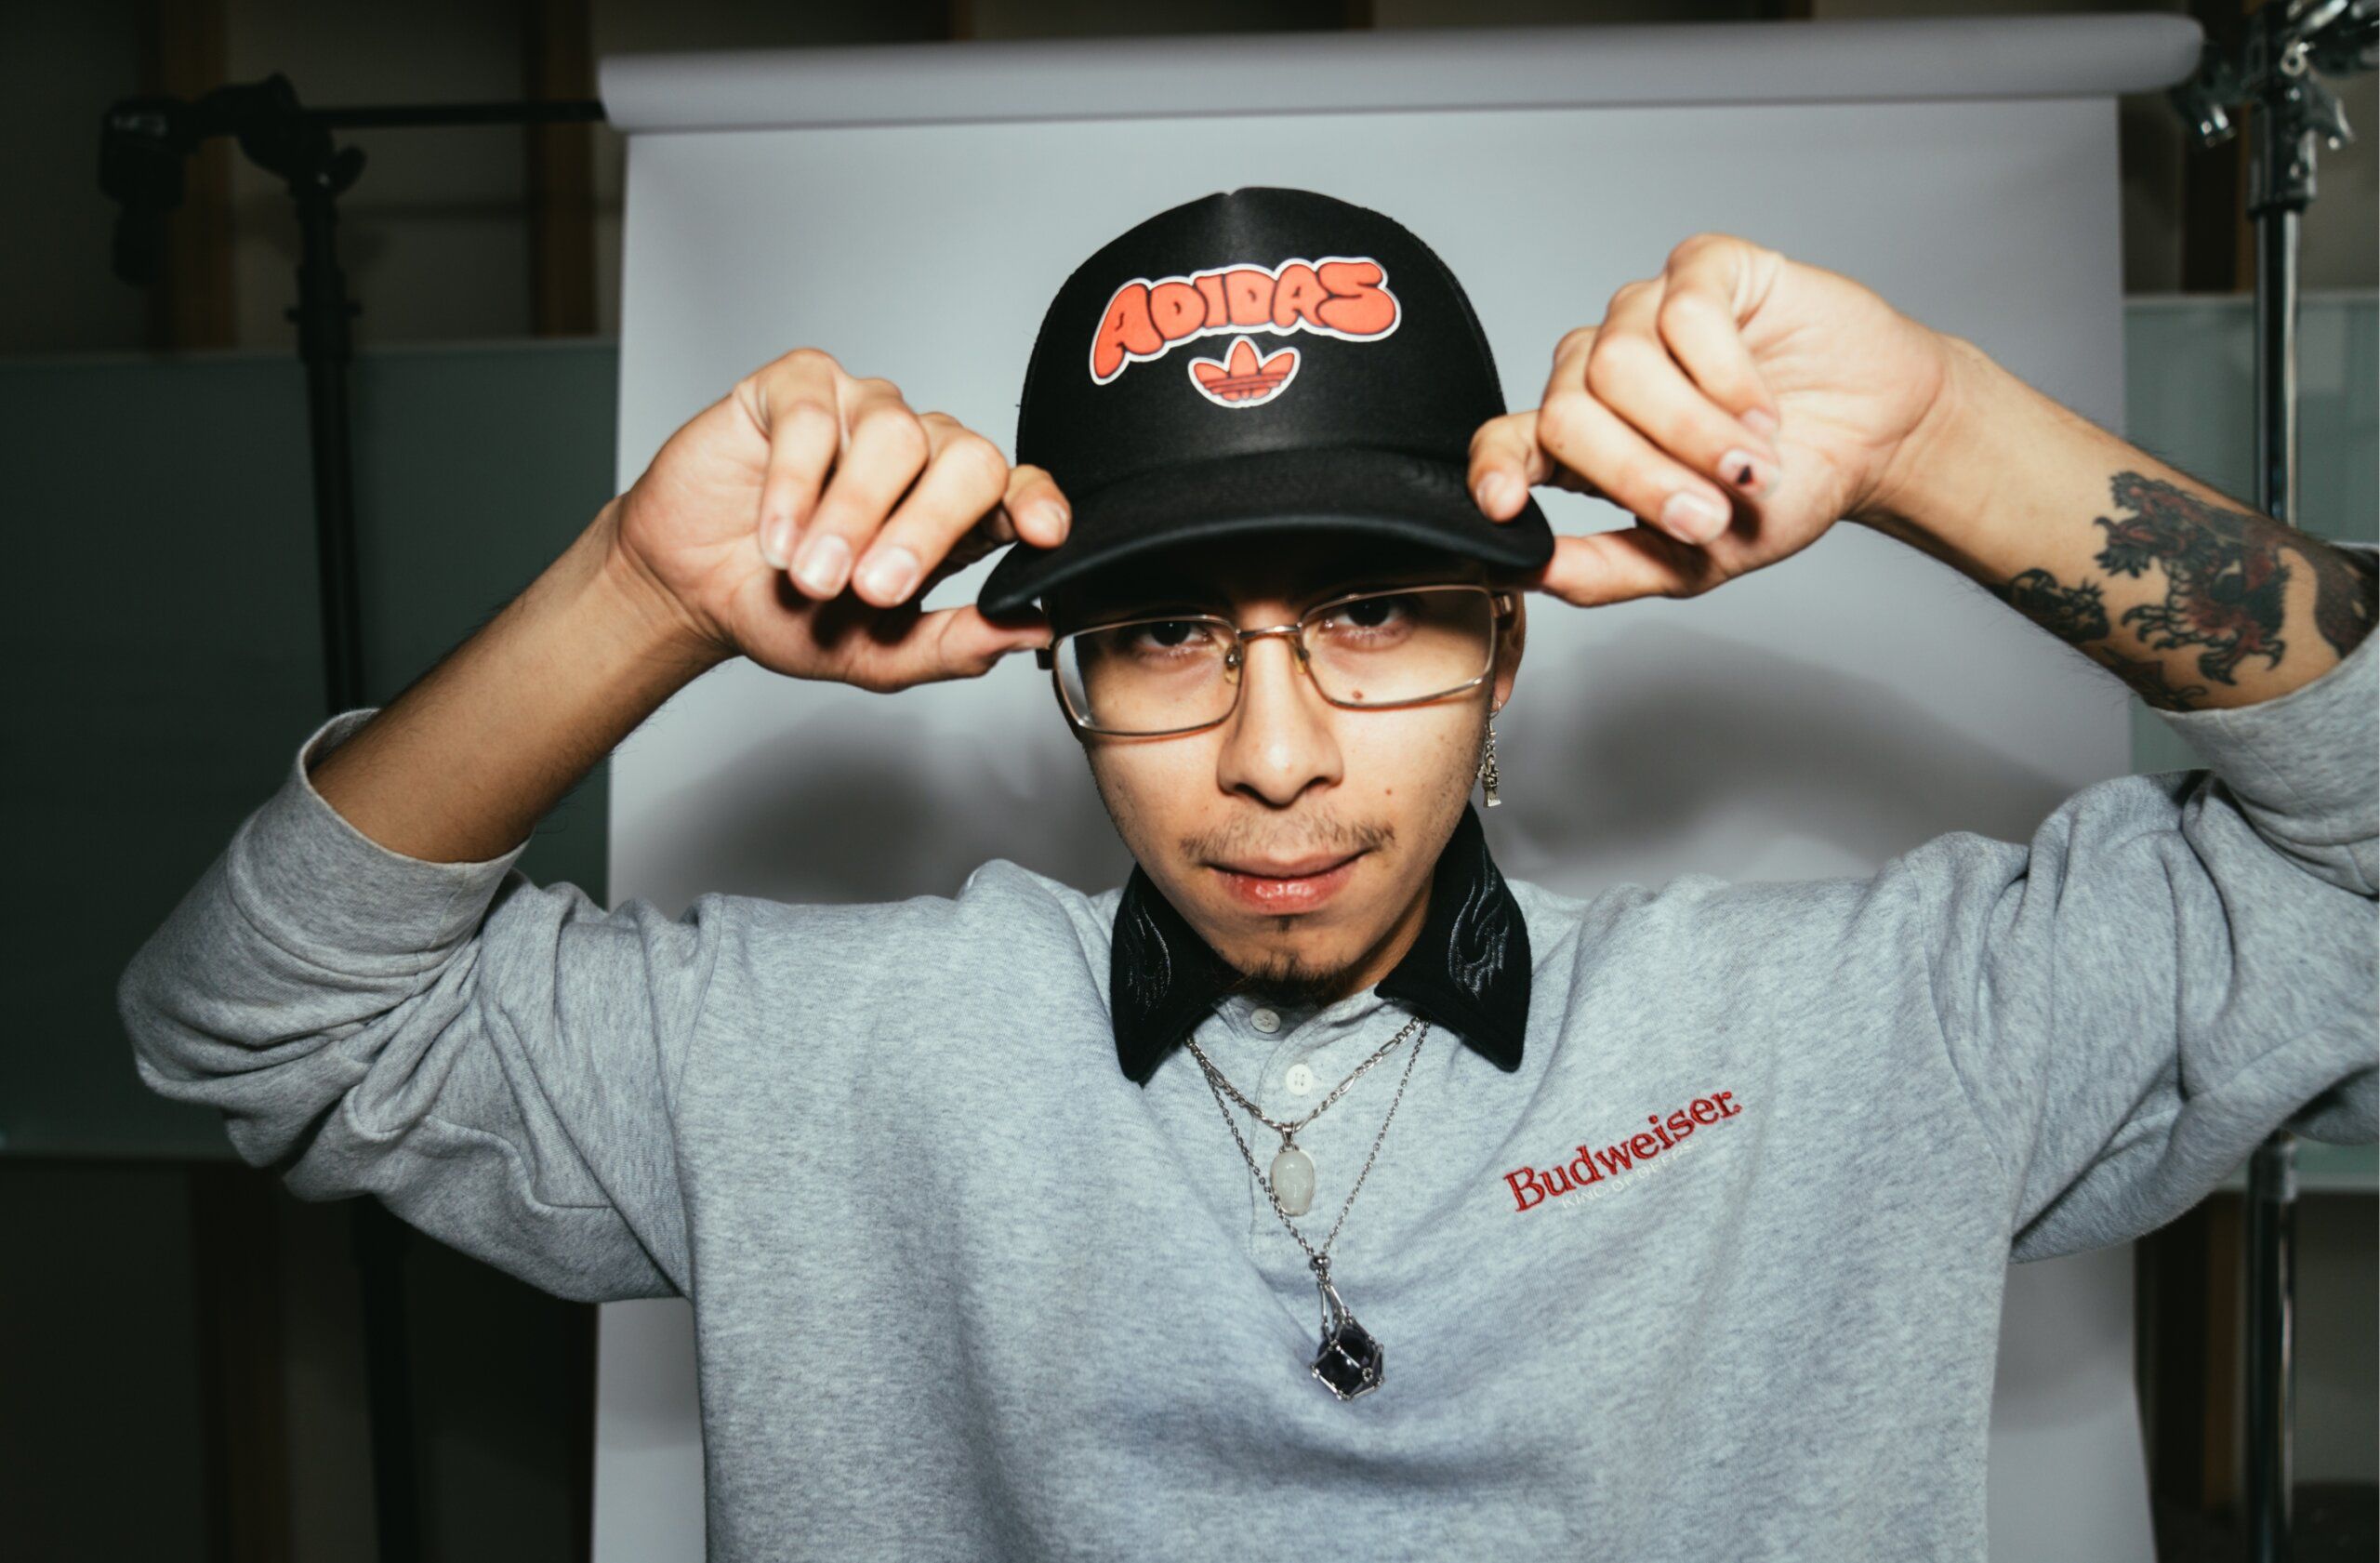 A young man adjusts his black Adidas cap, wearing glasses, a bow tie, and a grey Budweiser sweatshirt, standing in front of a white backdrop.